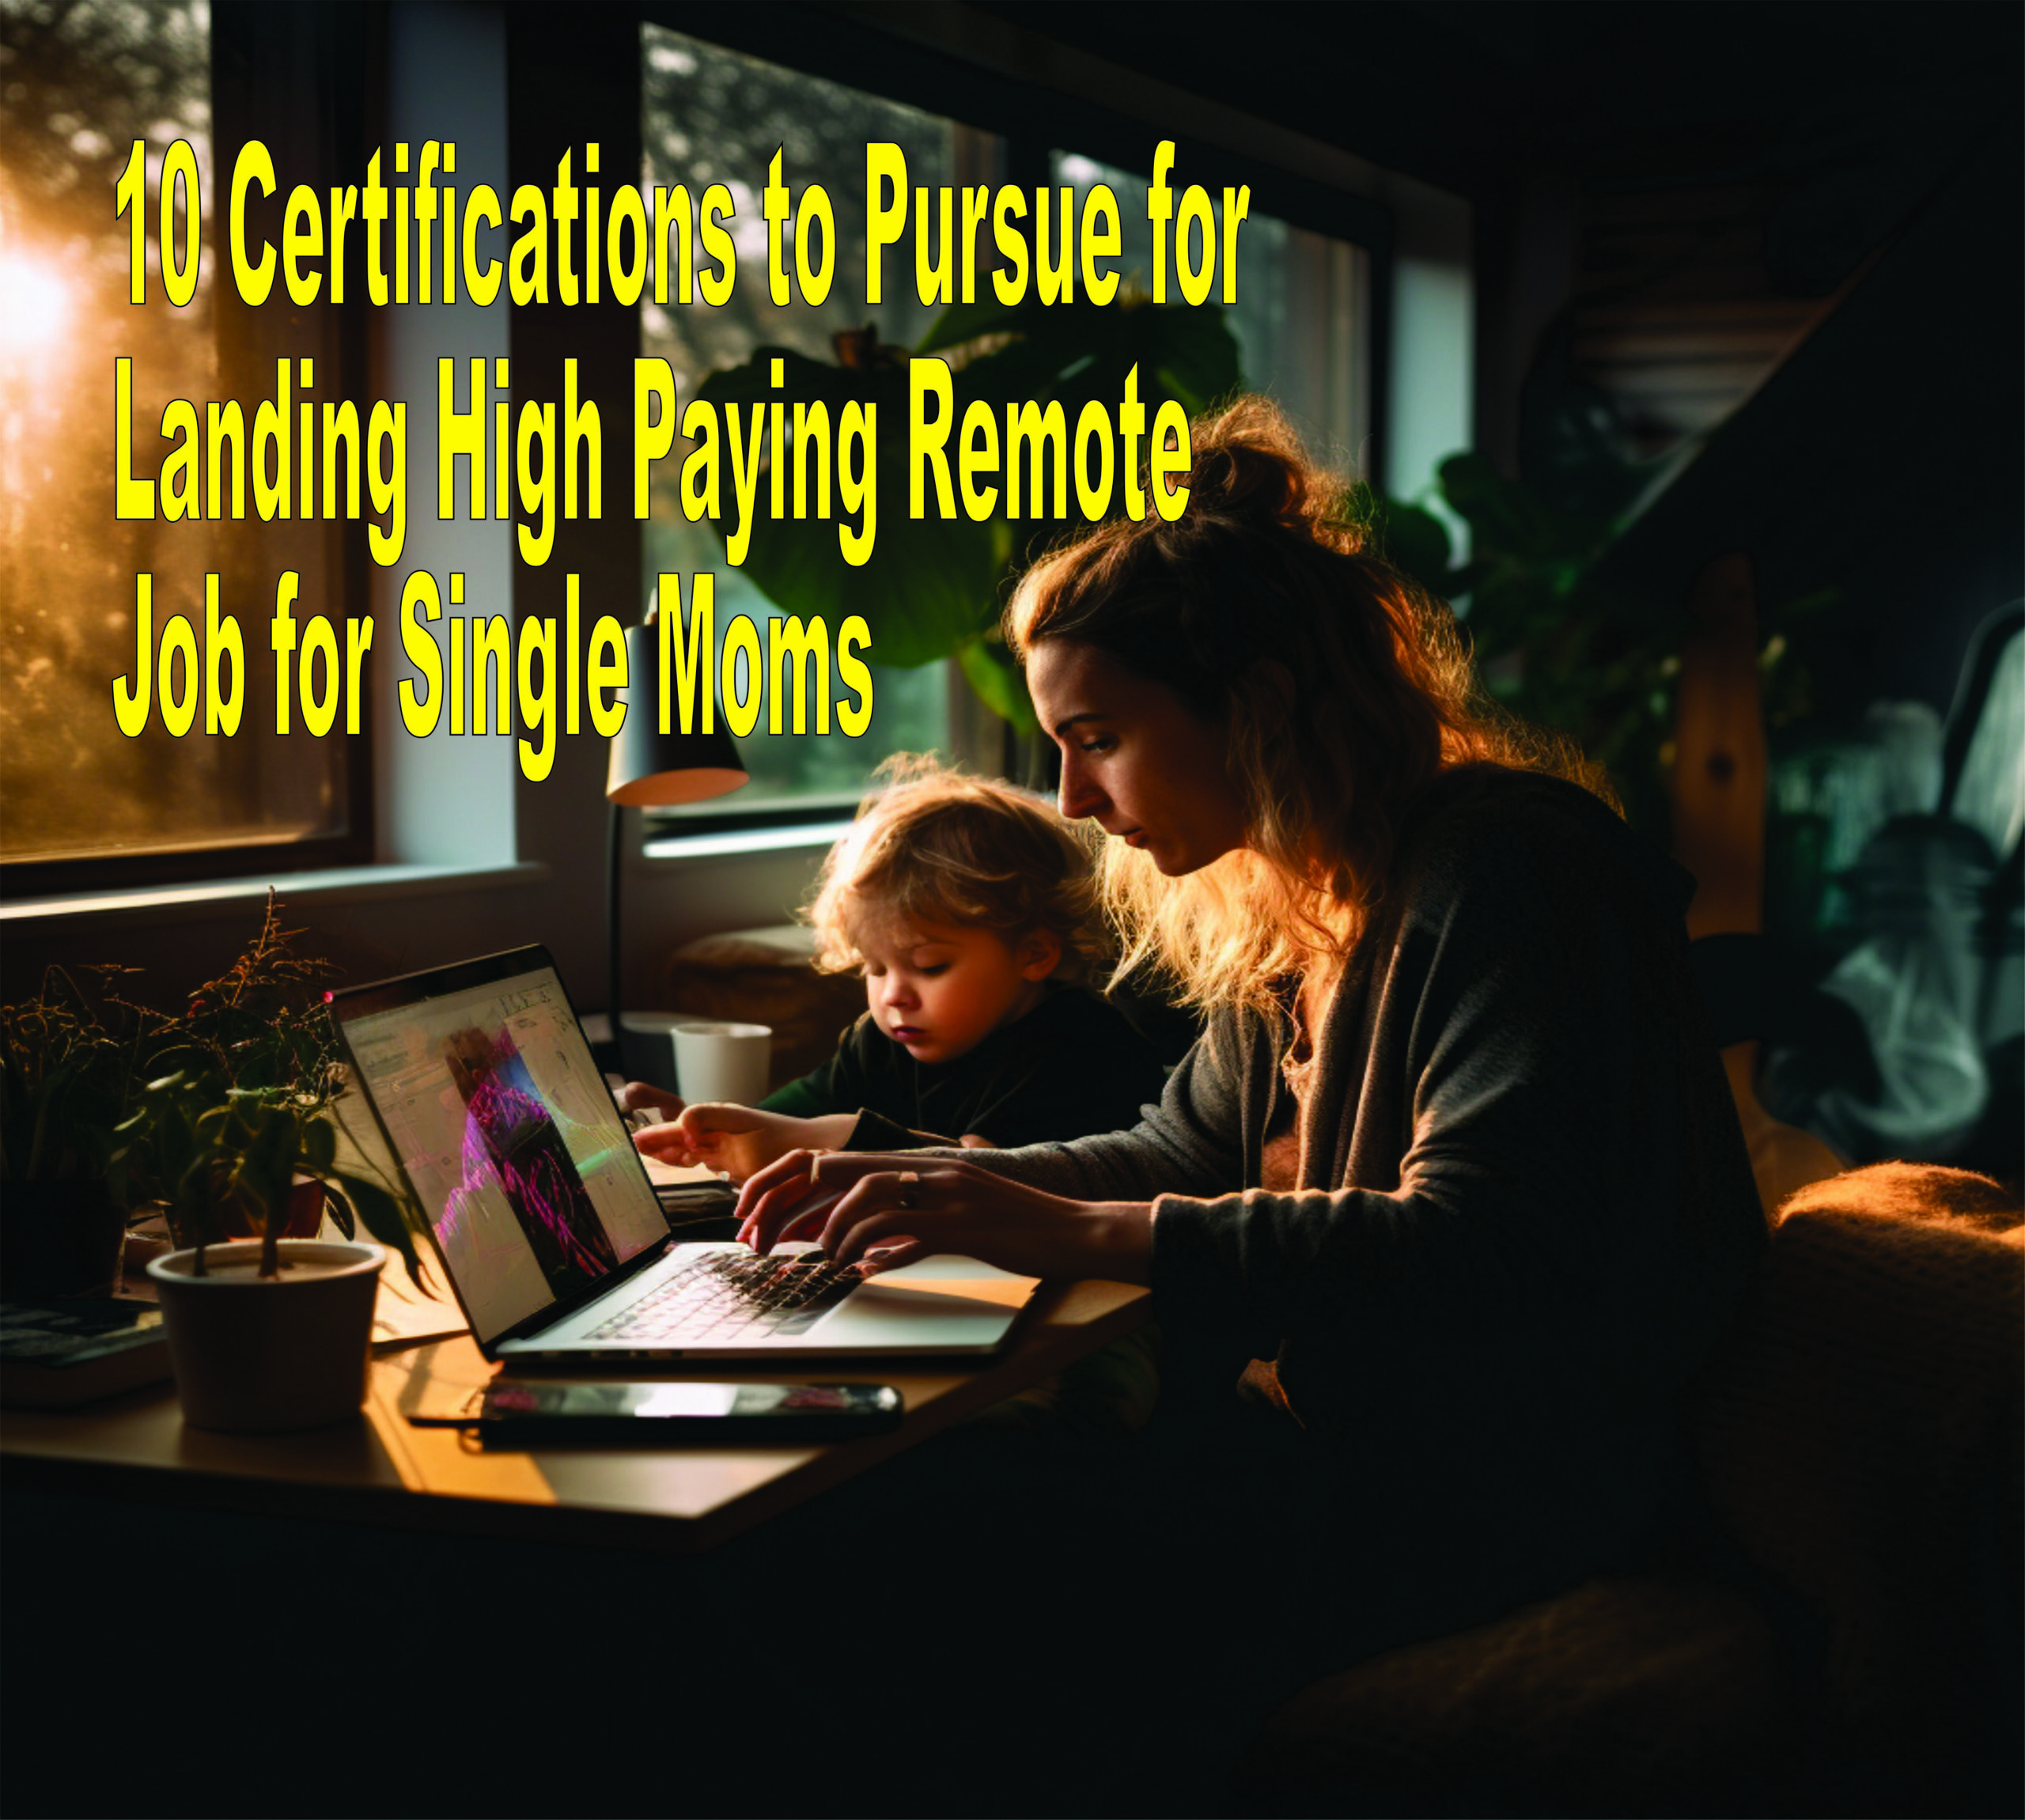 10 Certifications To Pursue For Landing High Paying Remote Job For Single Moms